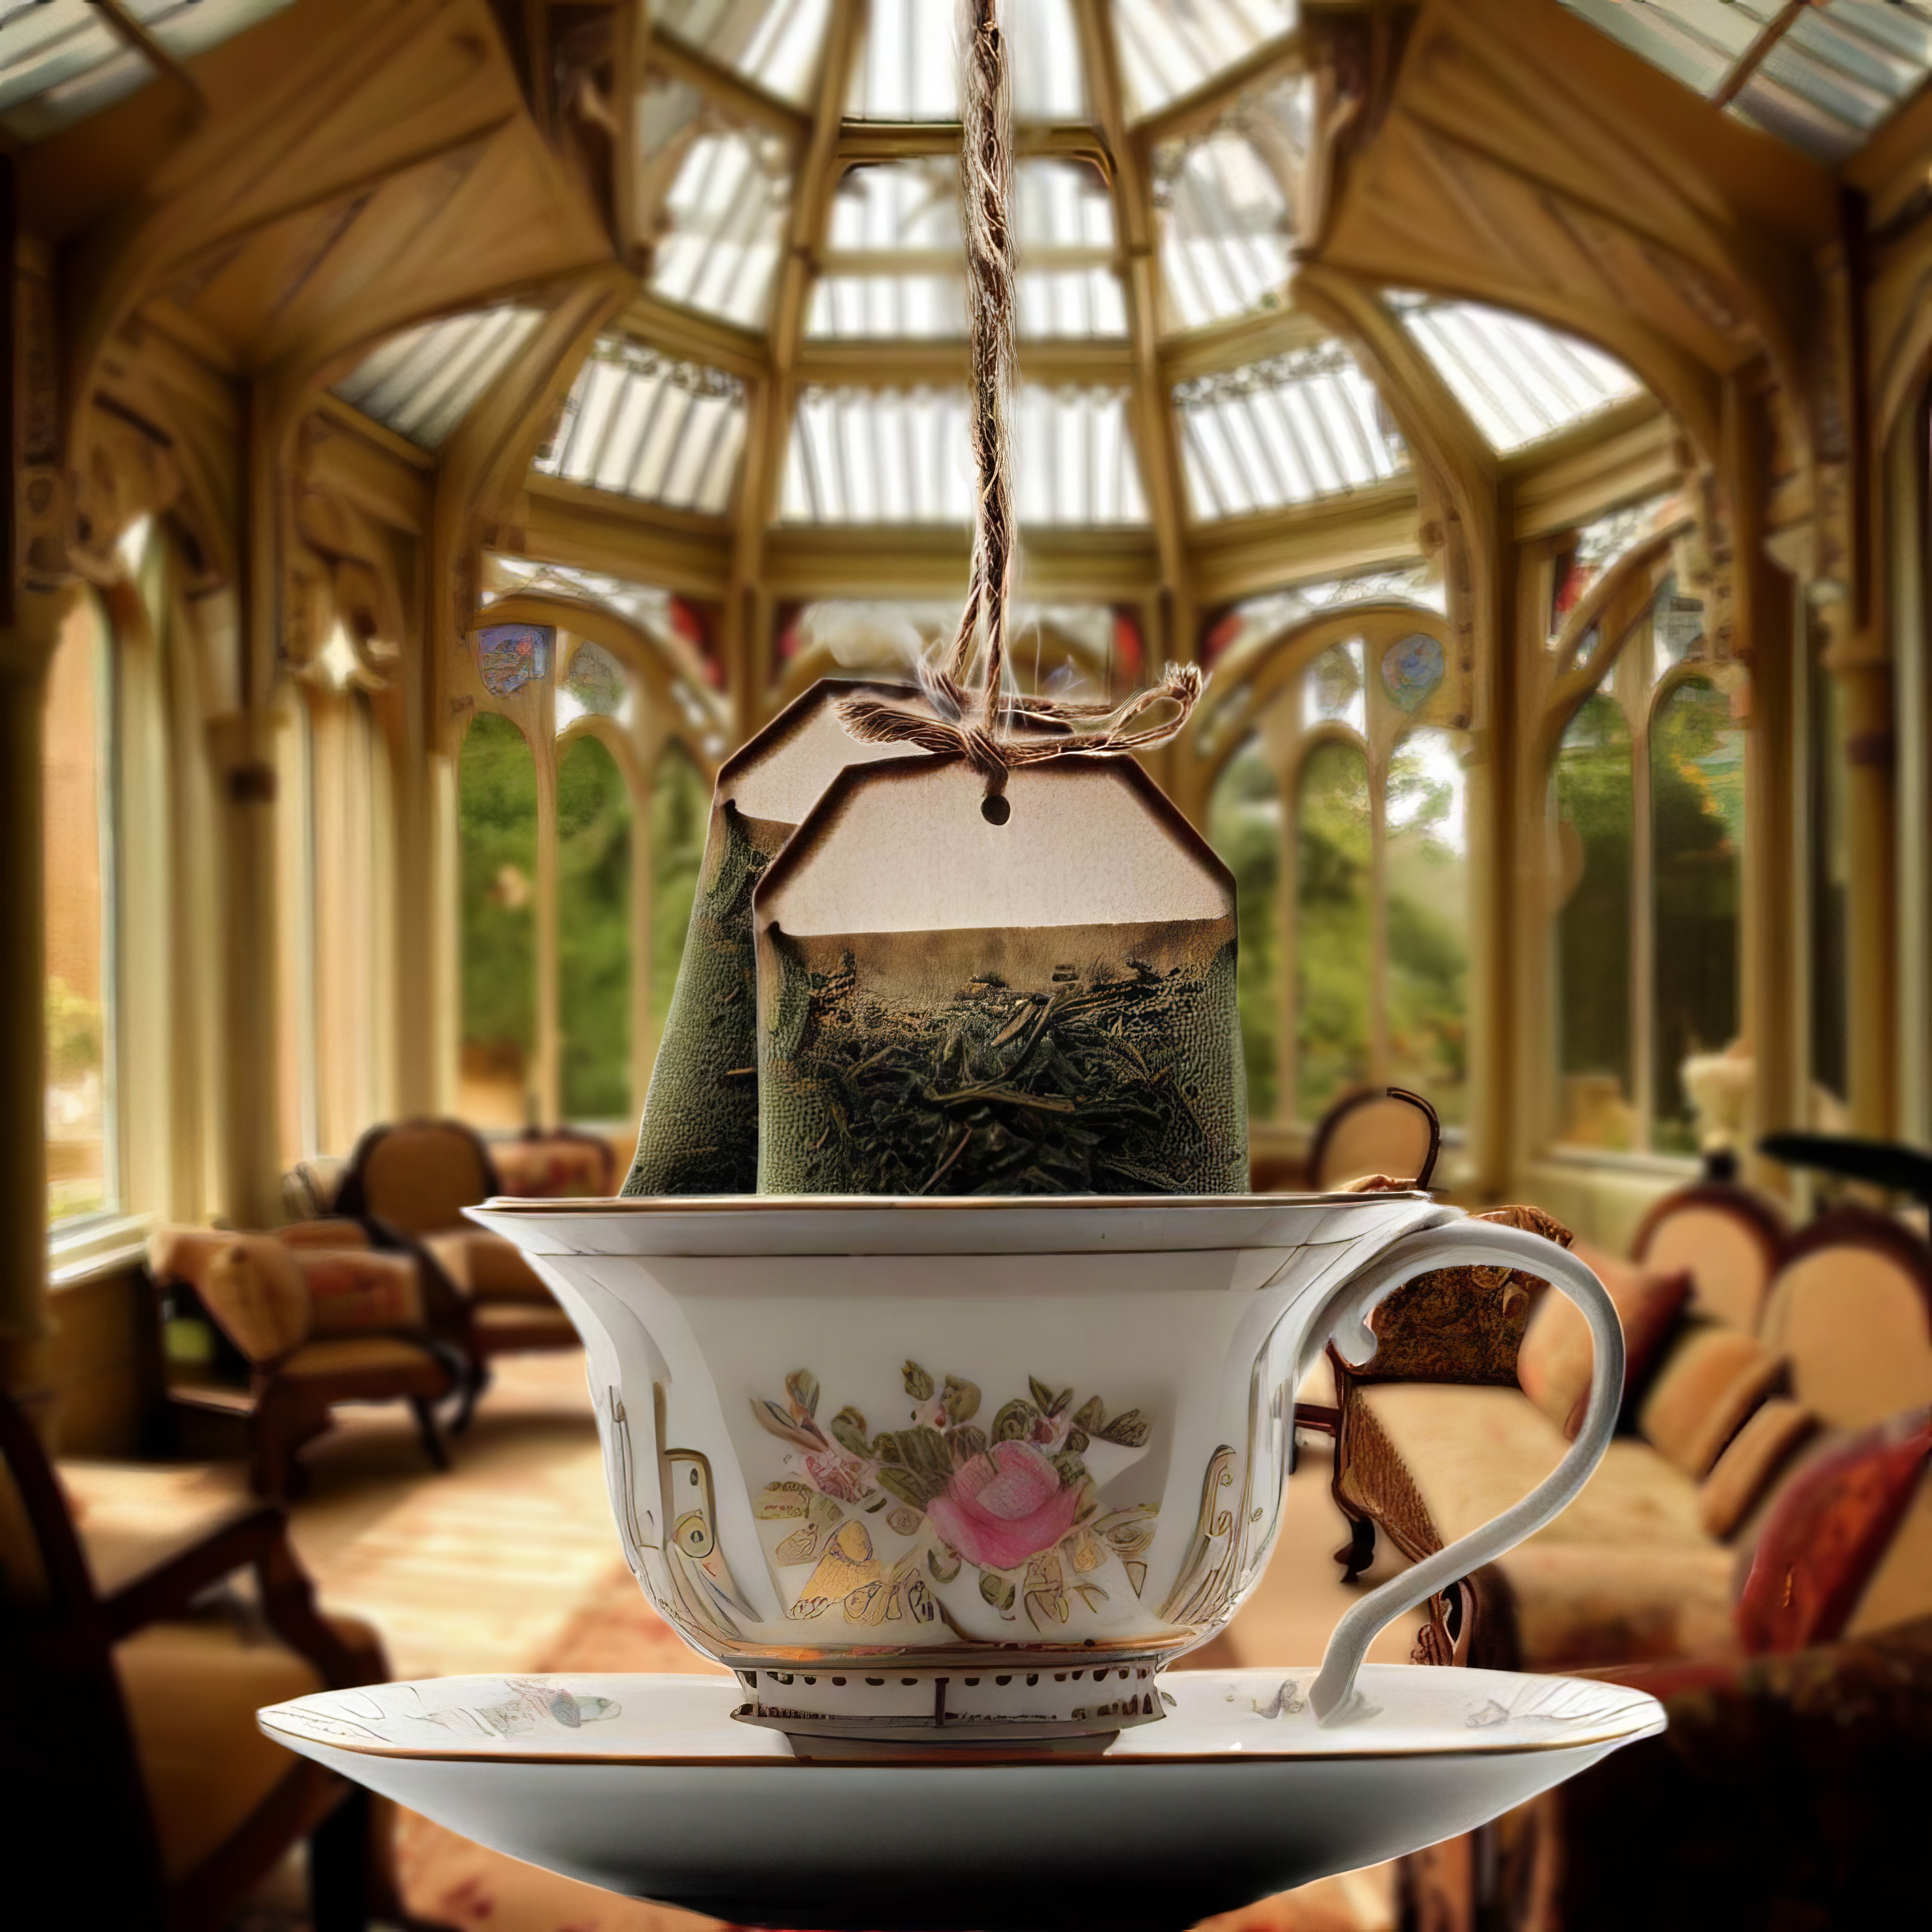 Two tea bags dipping in a teacup in a posh Victorian sunroom.